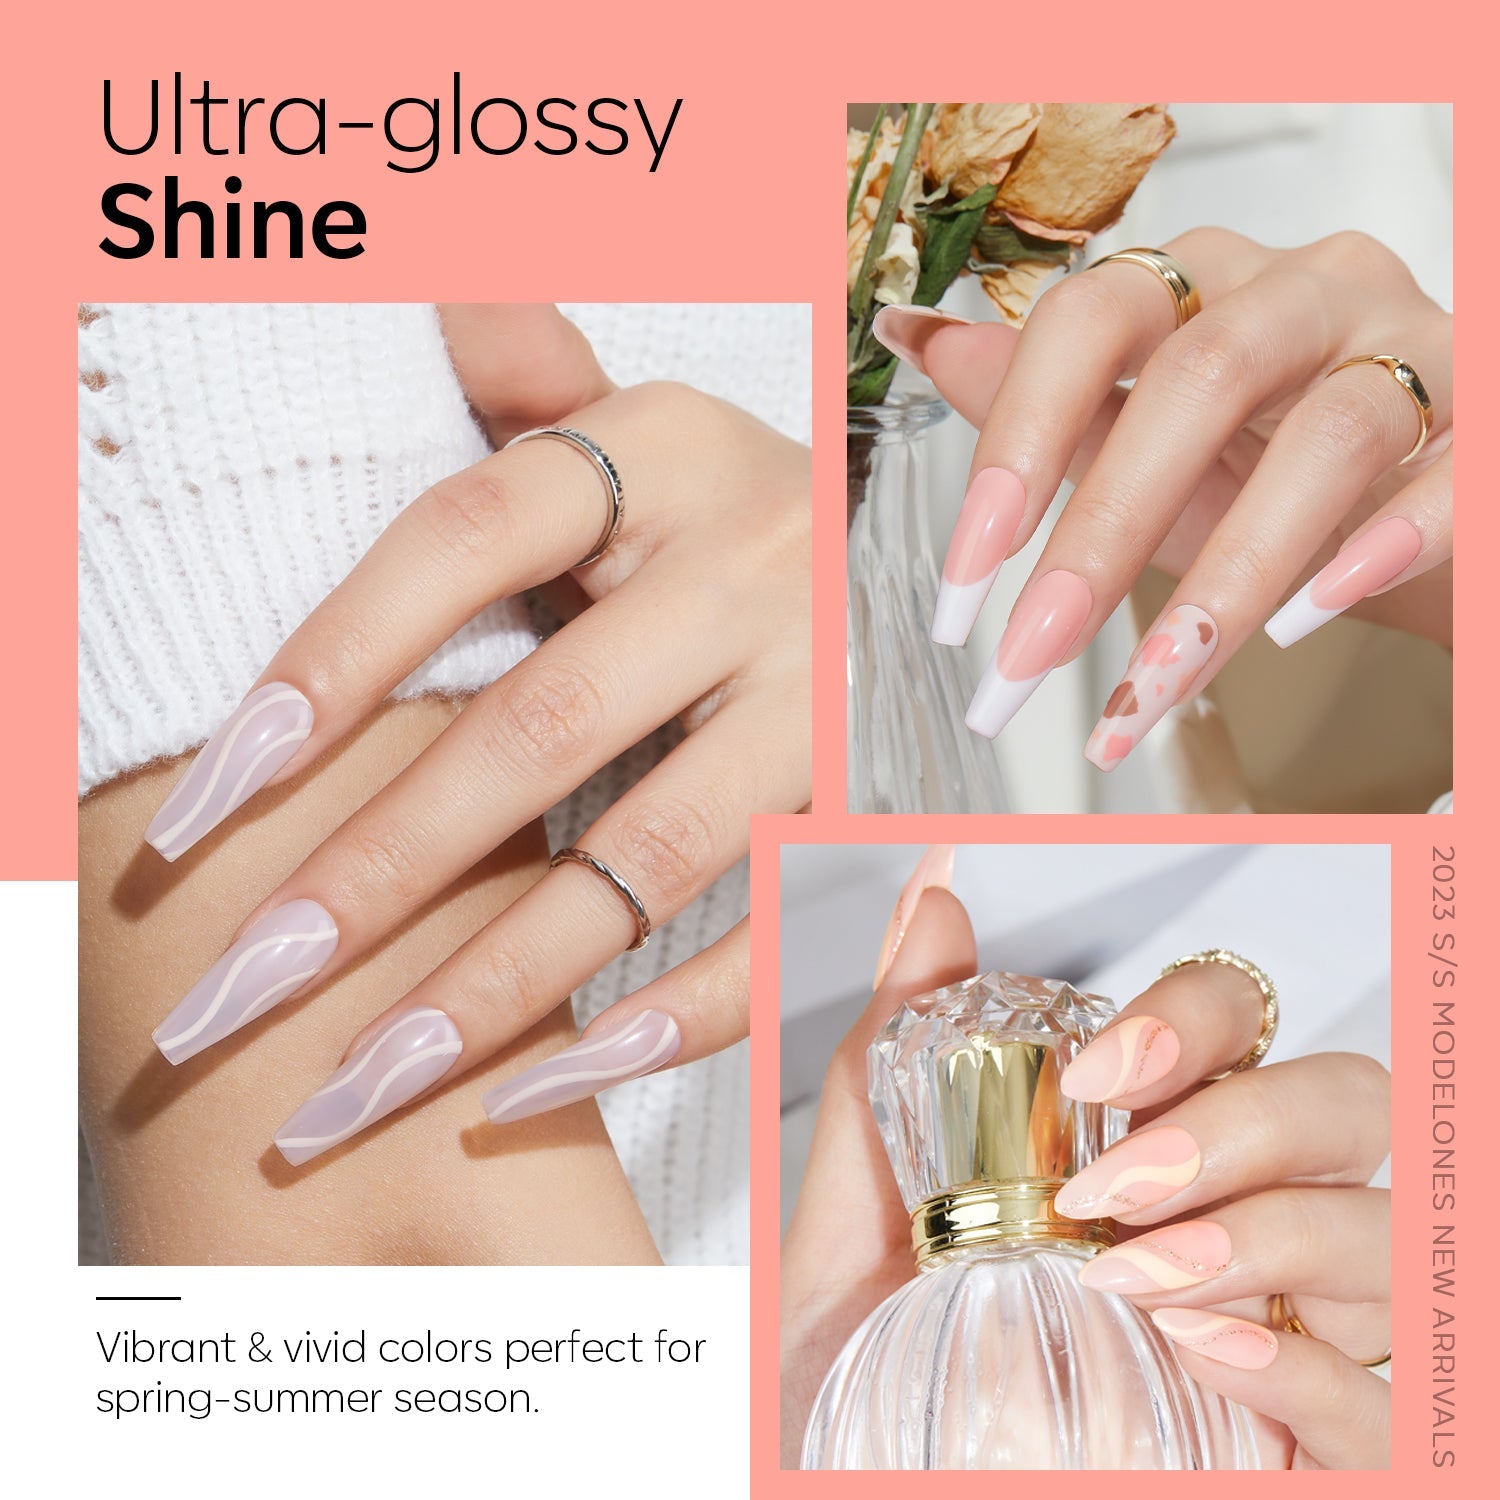 【Buy 1 Get 1 Free】9 Shades Solid Cream Gel Polish Color Cube Collection